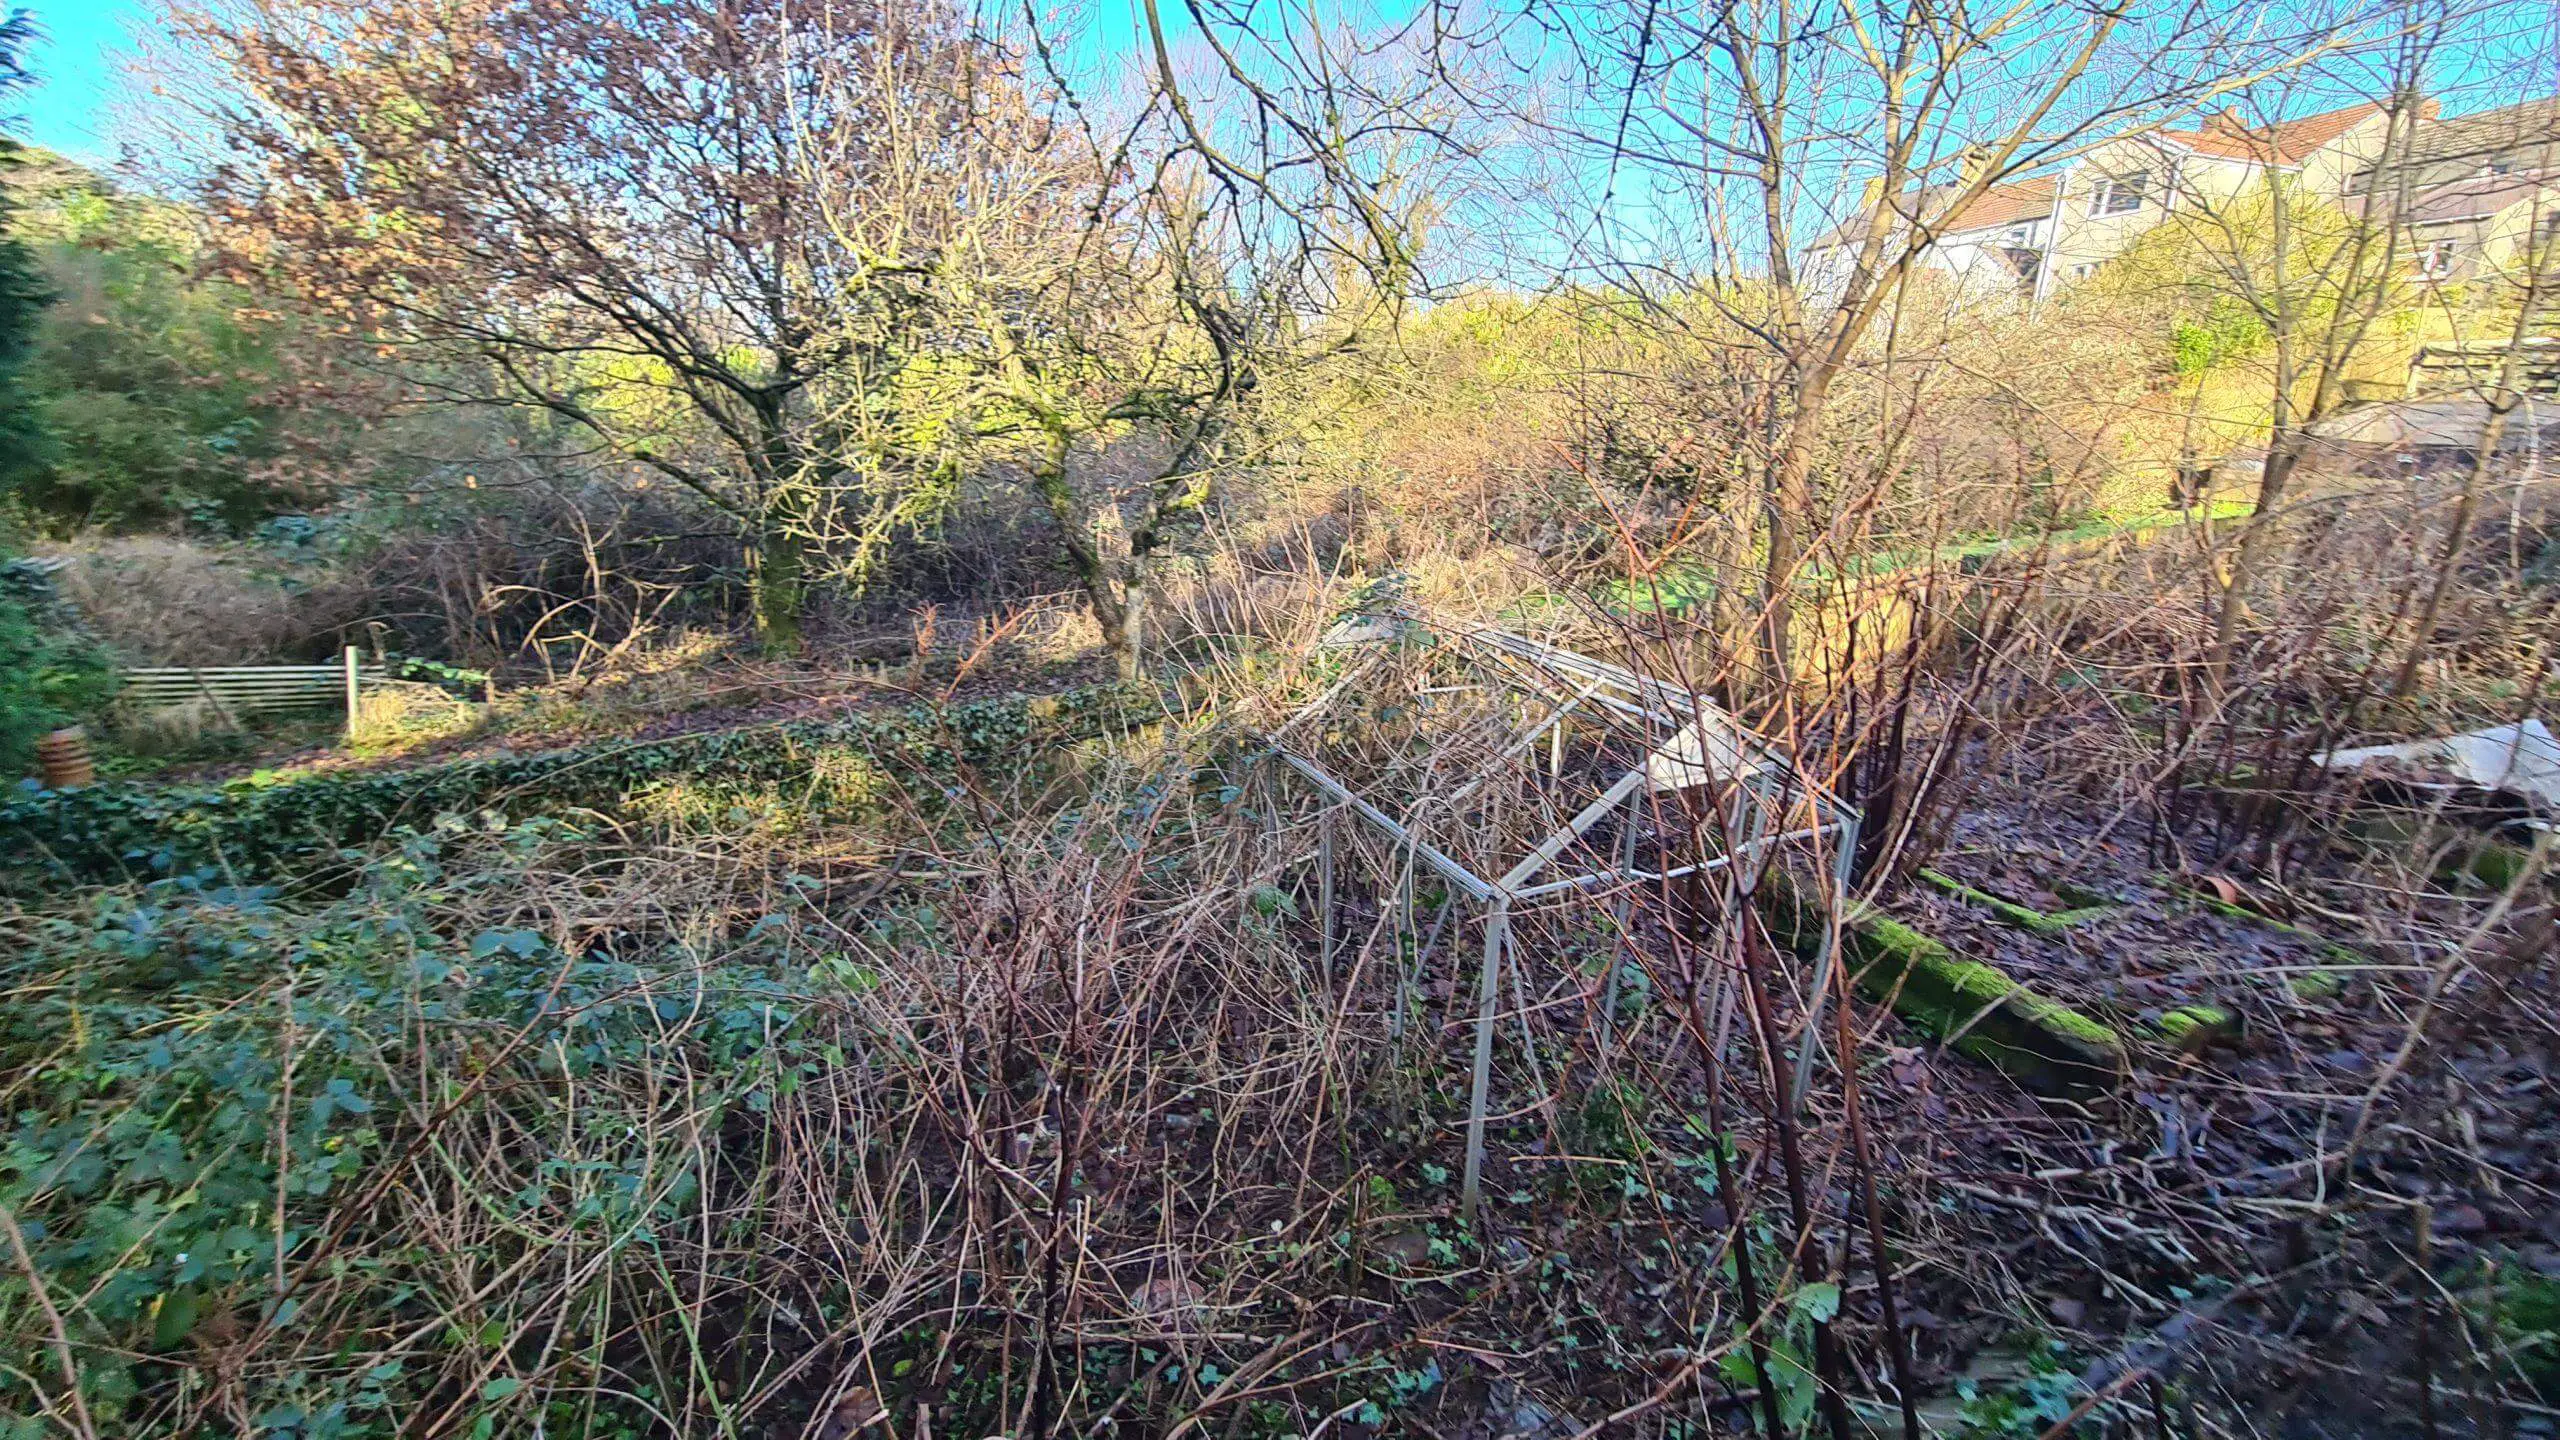 Site clearance of a garden underway from various invasive weeds